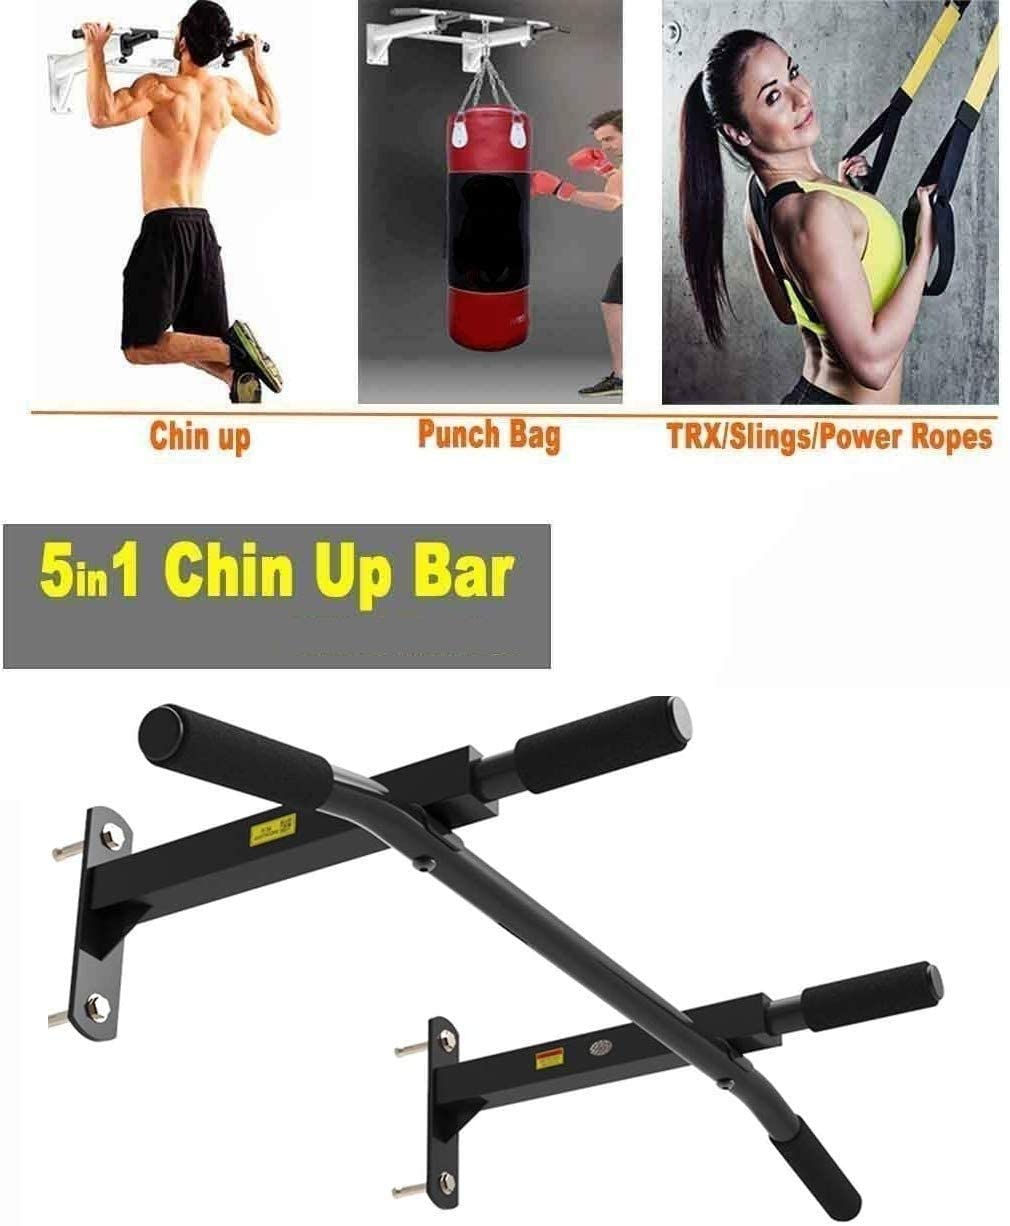 Max Strength-5 in 1 Wall Mounted Metal Chin Up Pull Up Bar Punch Bag TRX Slings Power Ropes Speed Ball Boxing Bag Hook Home Fitness Exercise Bracket